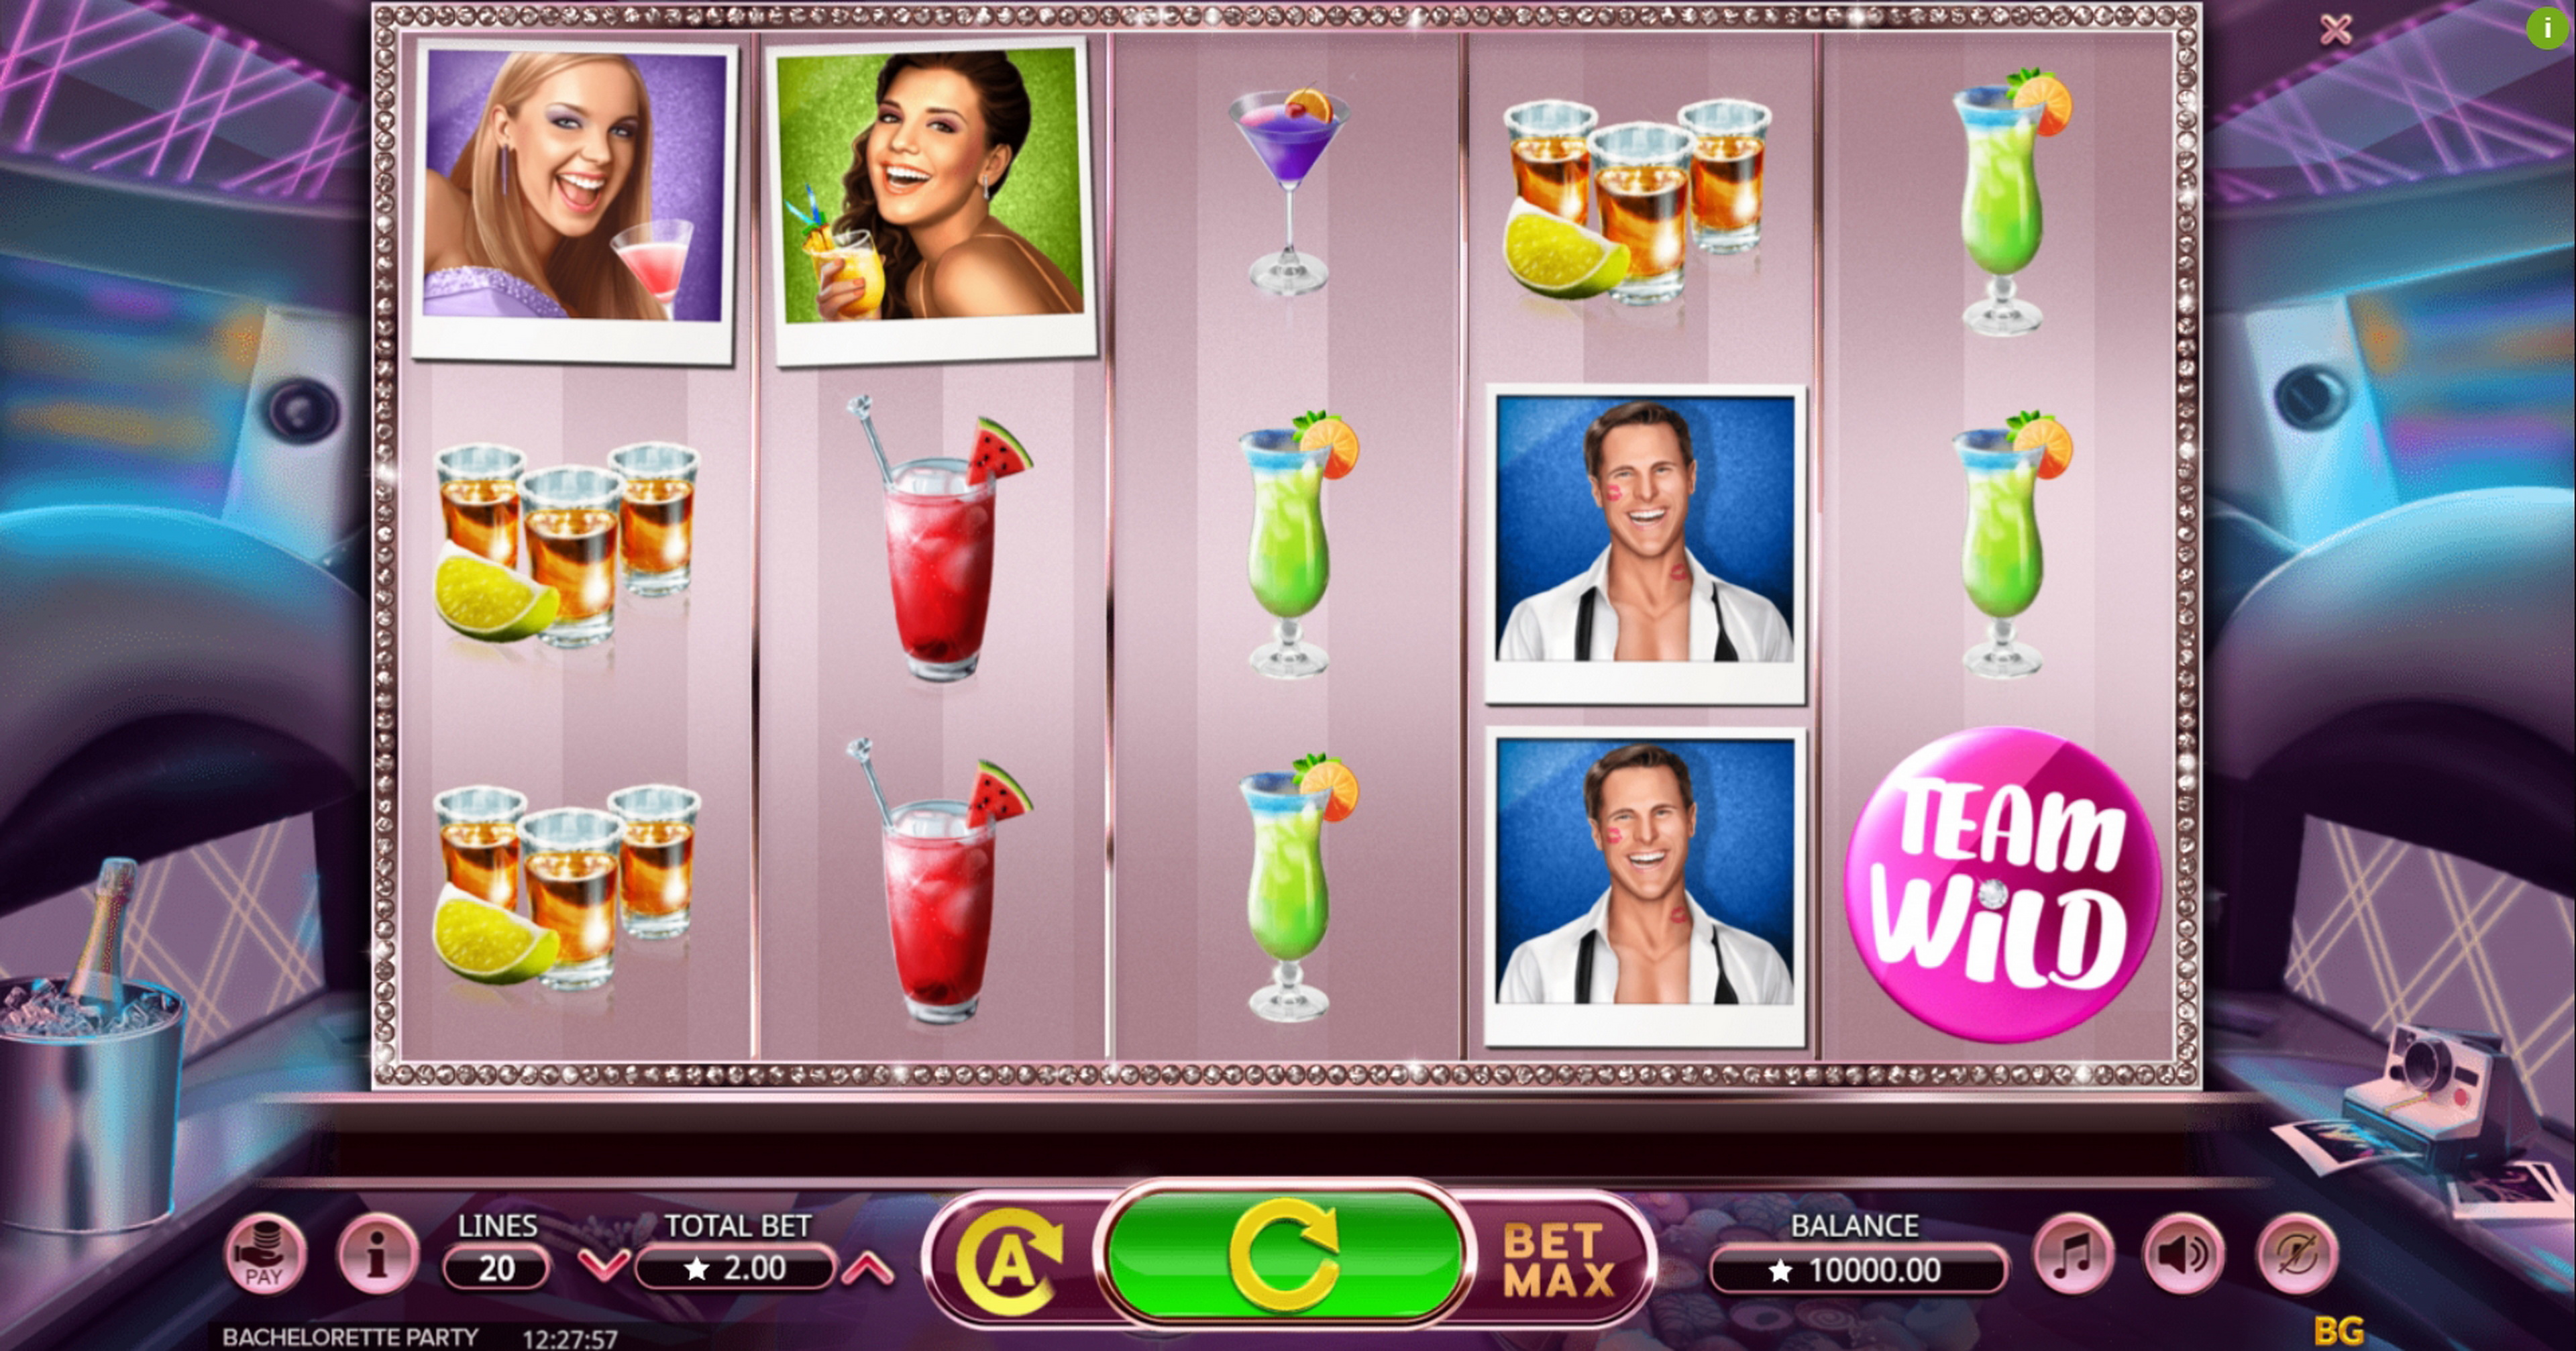 Reels in Bachelorette Party Slot Game by Booming Games